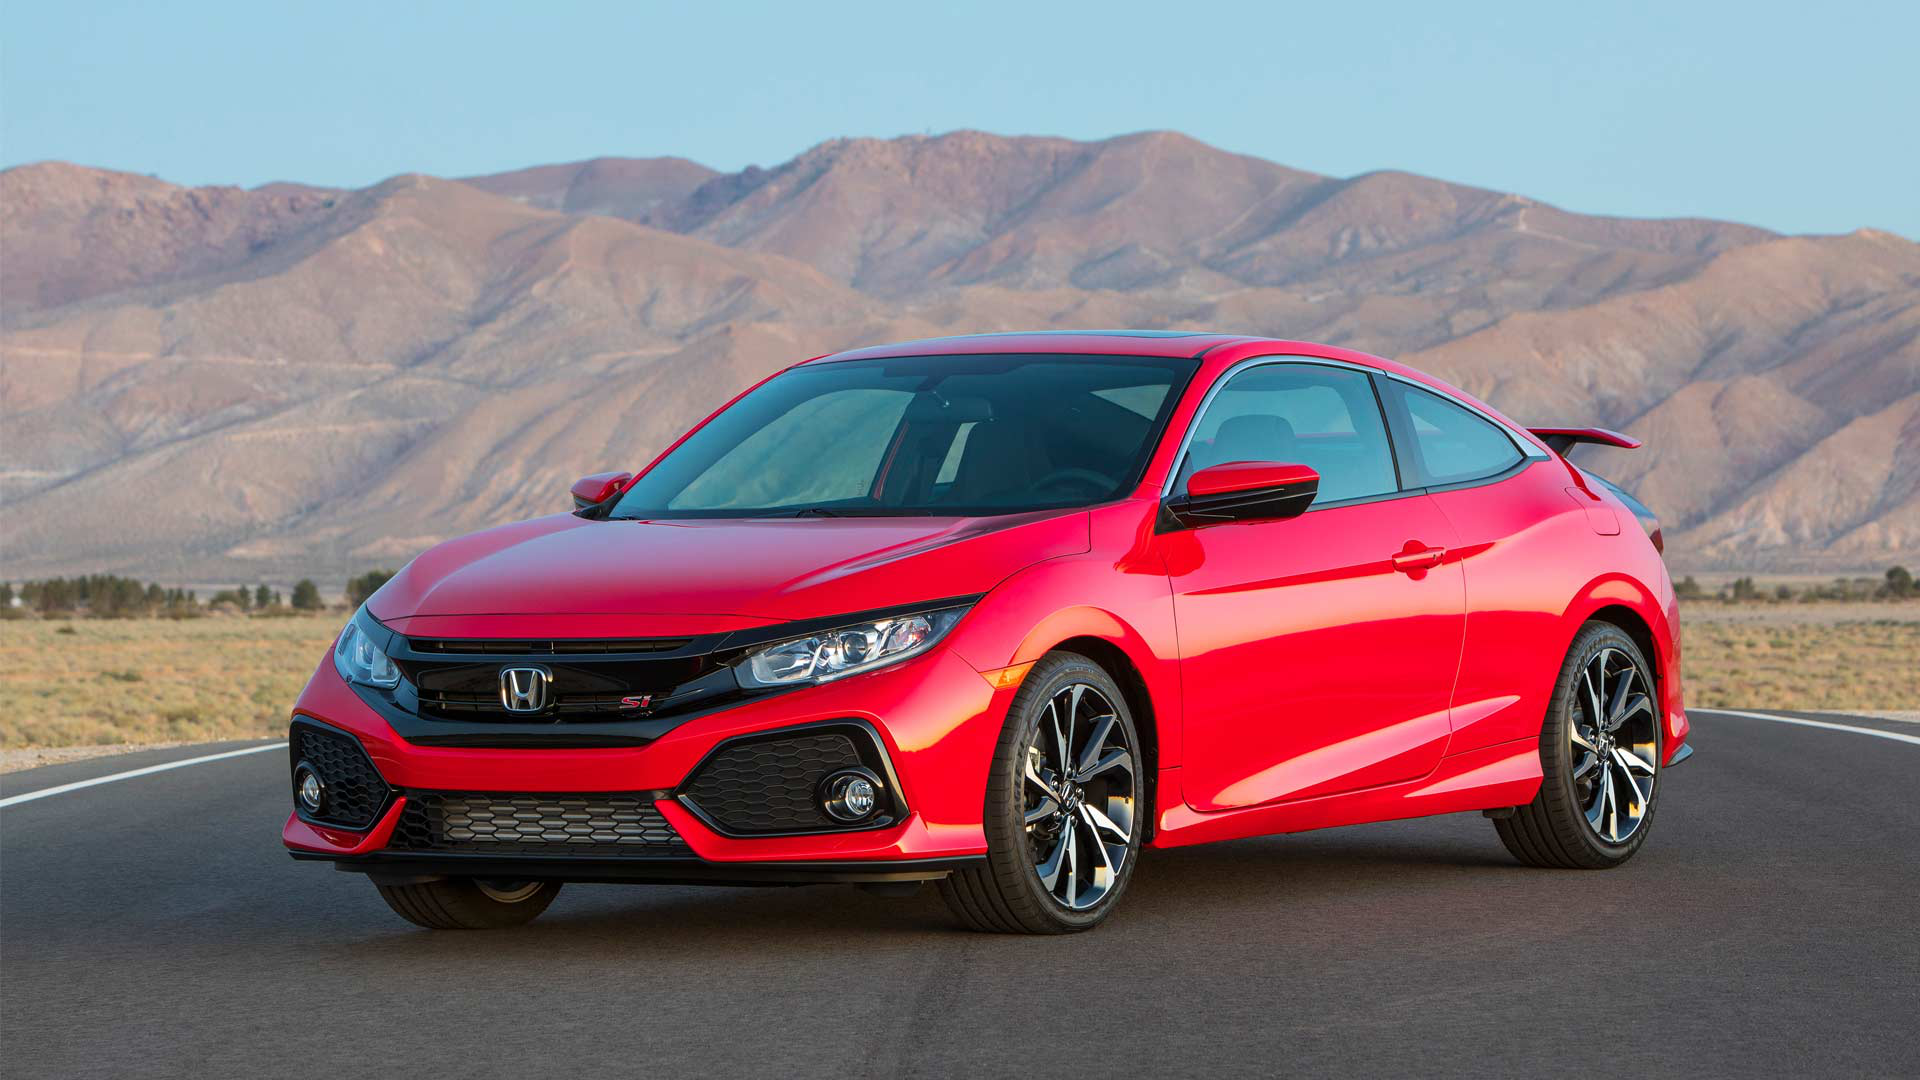 The best features of the brand new Honda Civic you need to know about